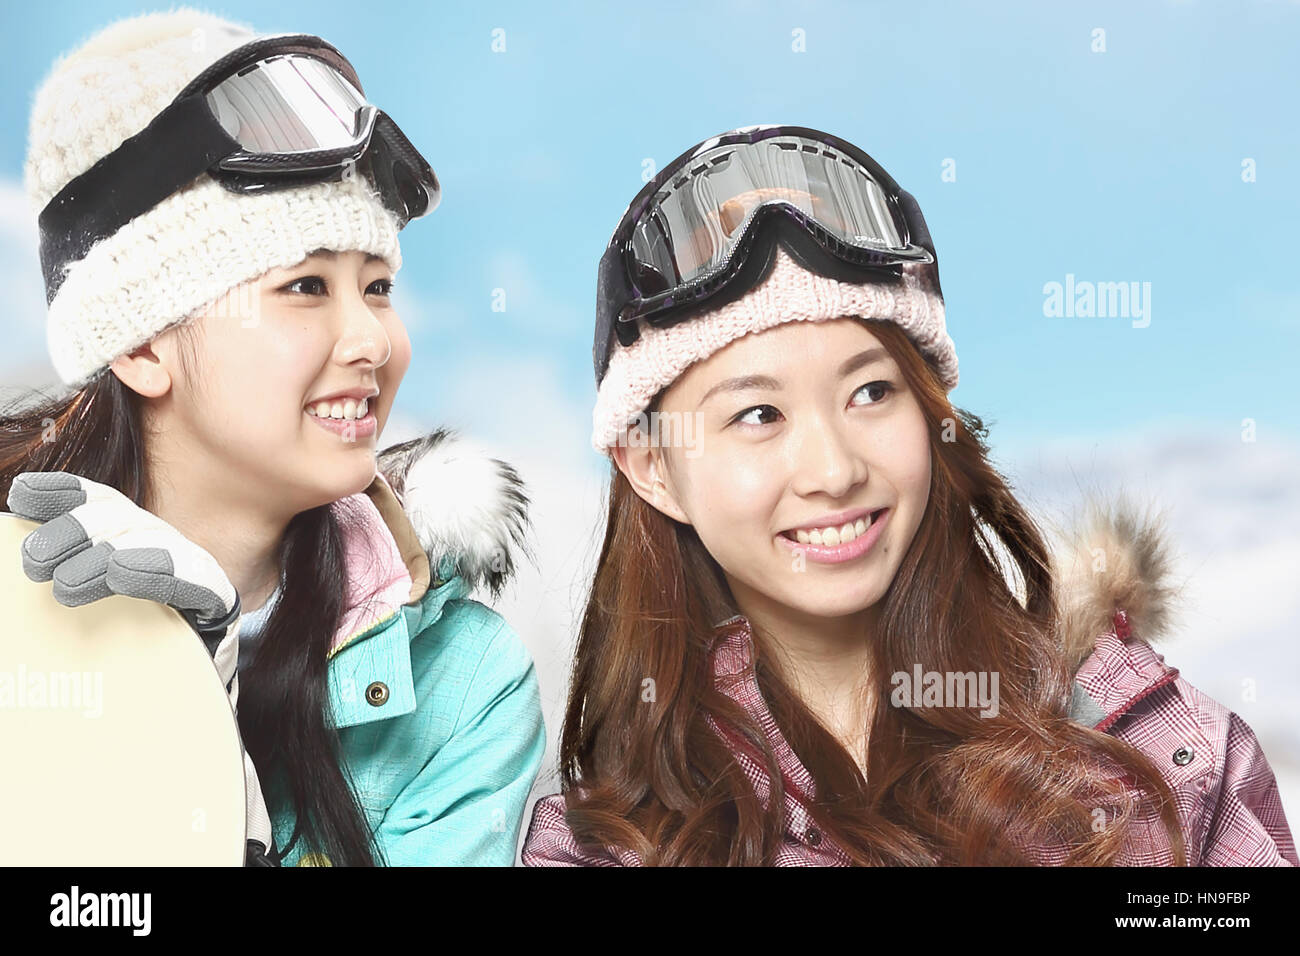 Young Japanese women snowboarding Stock Photo